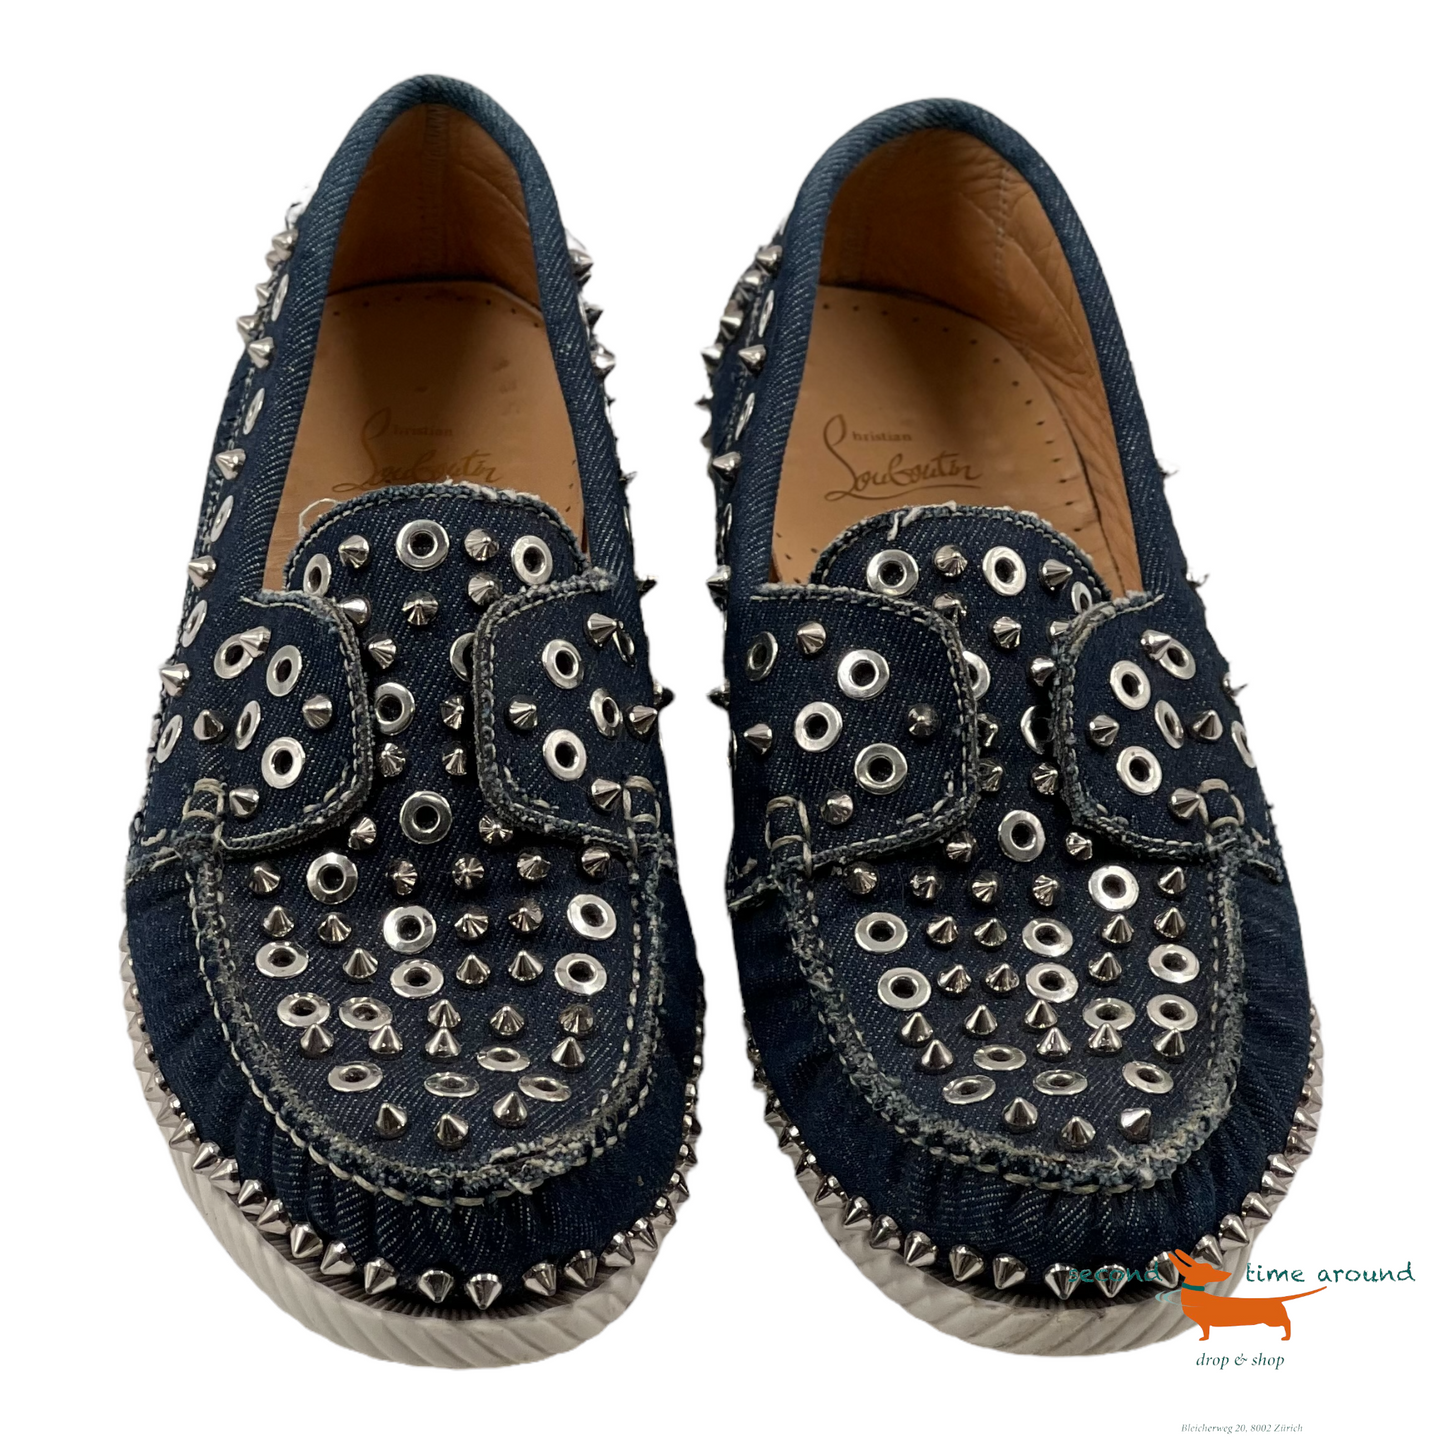 Louboutin Yacht Spikes Loafer